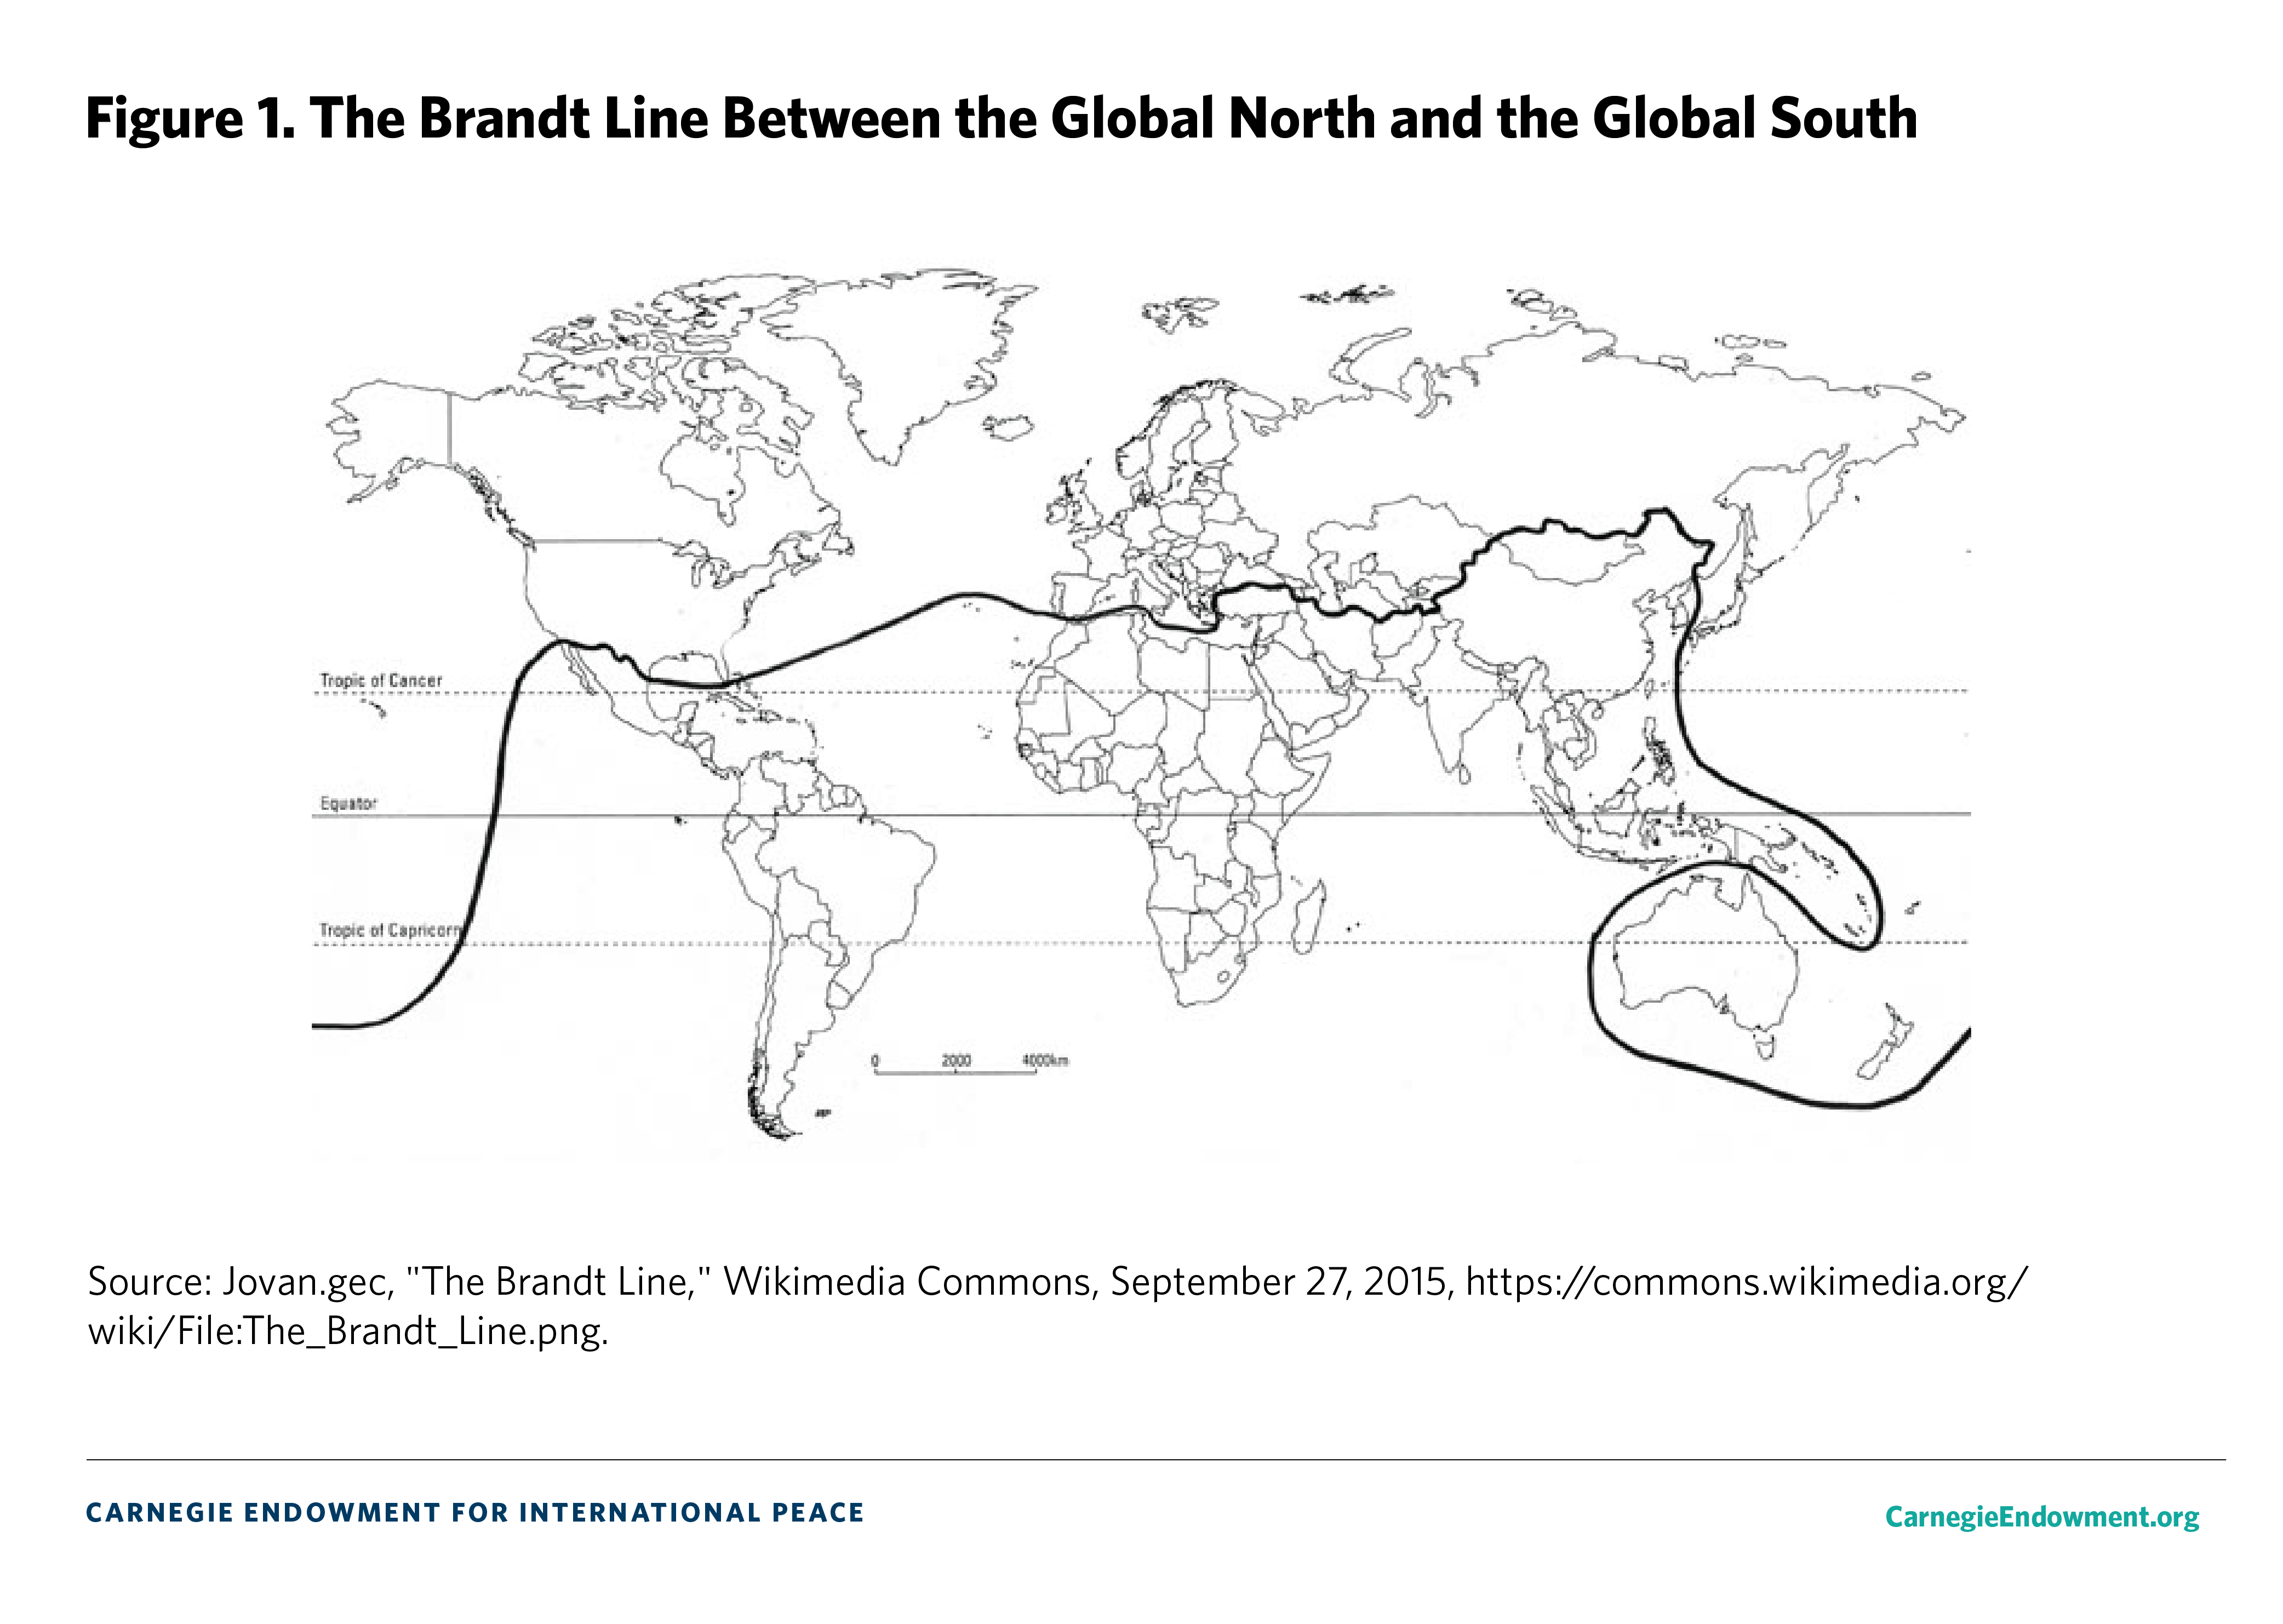 The map from the Brandt Report featuring a line roughly dividing the Global North from the Global South.